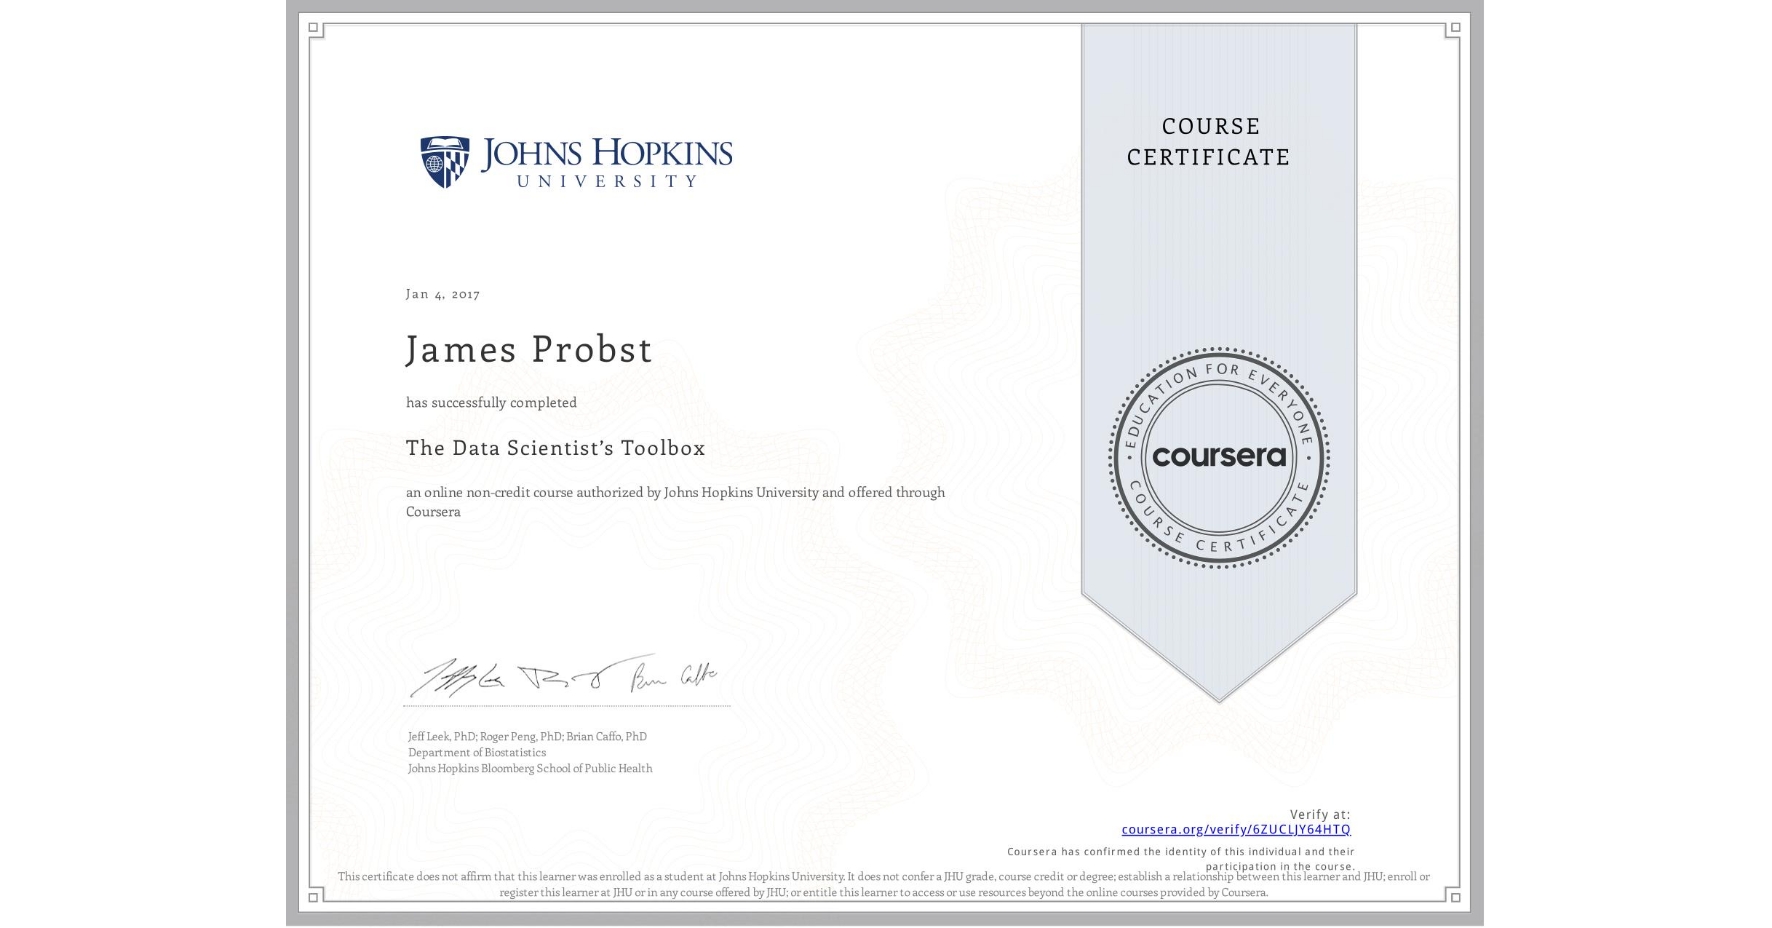 View certificate for James Probst, The Data Scientist’s Toolbox, an online non-credit course authorized by Johns Hopkins University and offered through Coursera